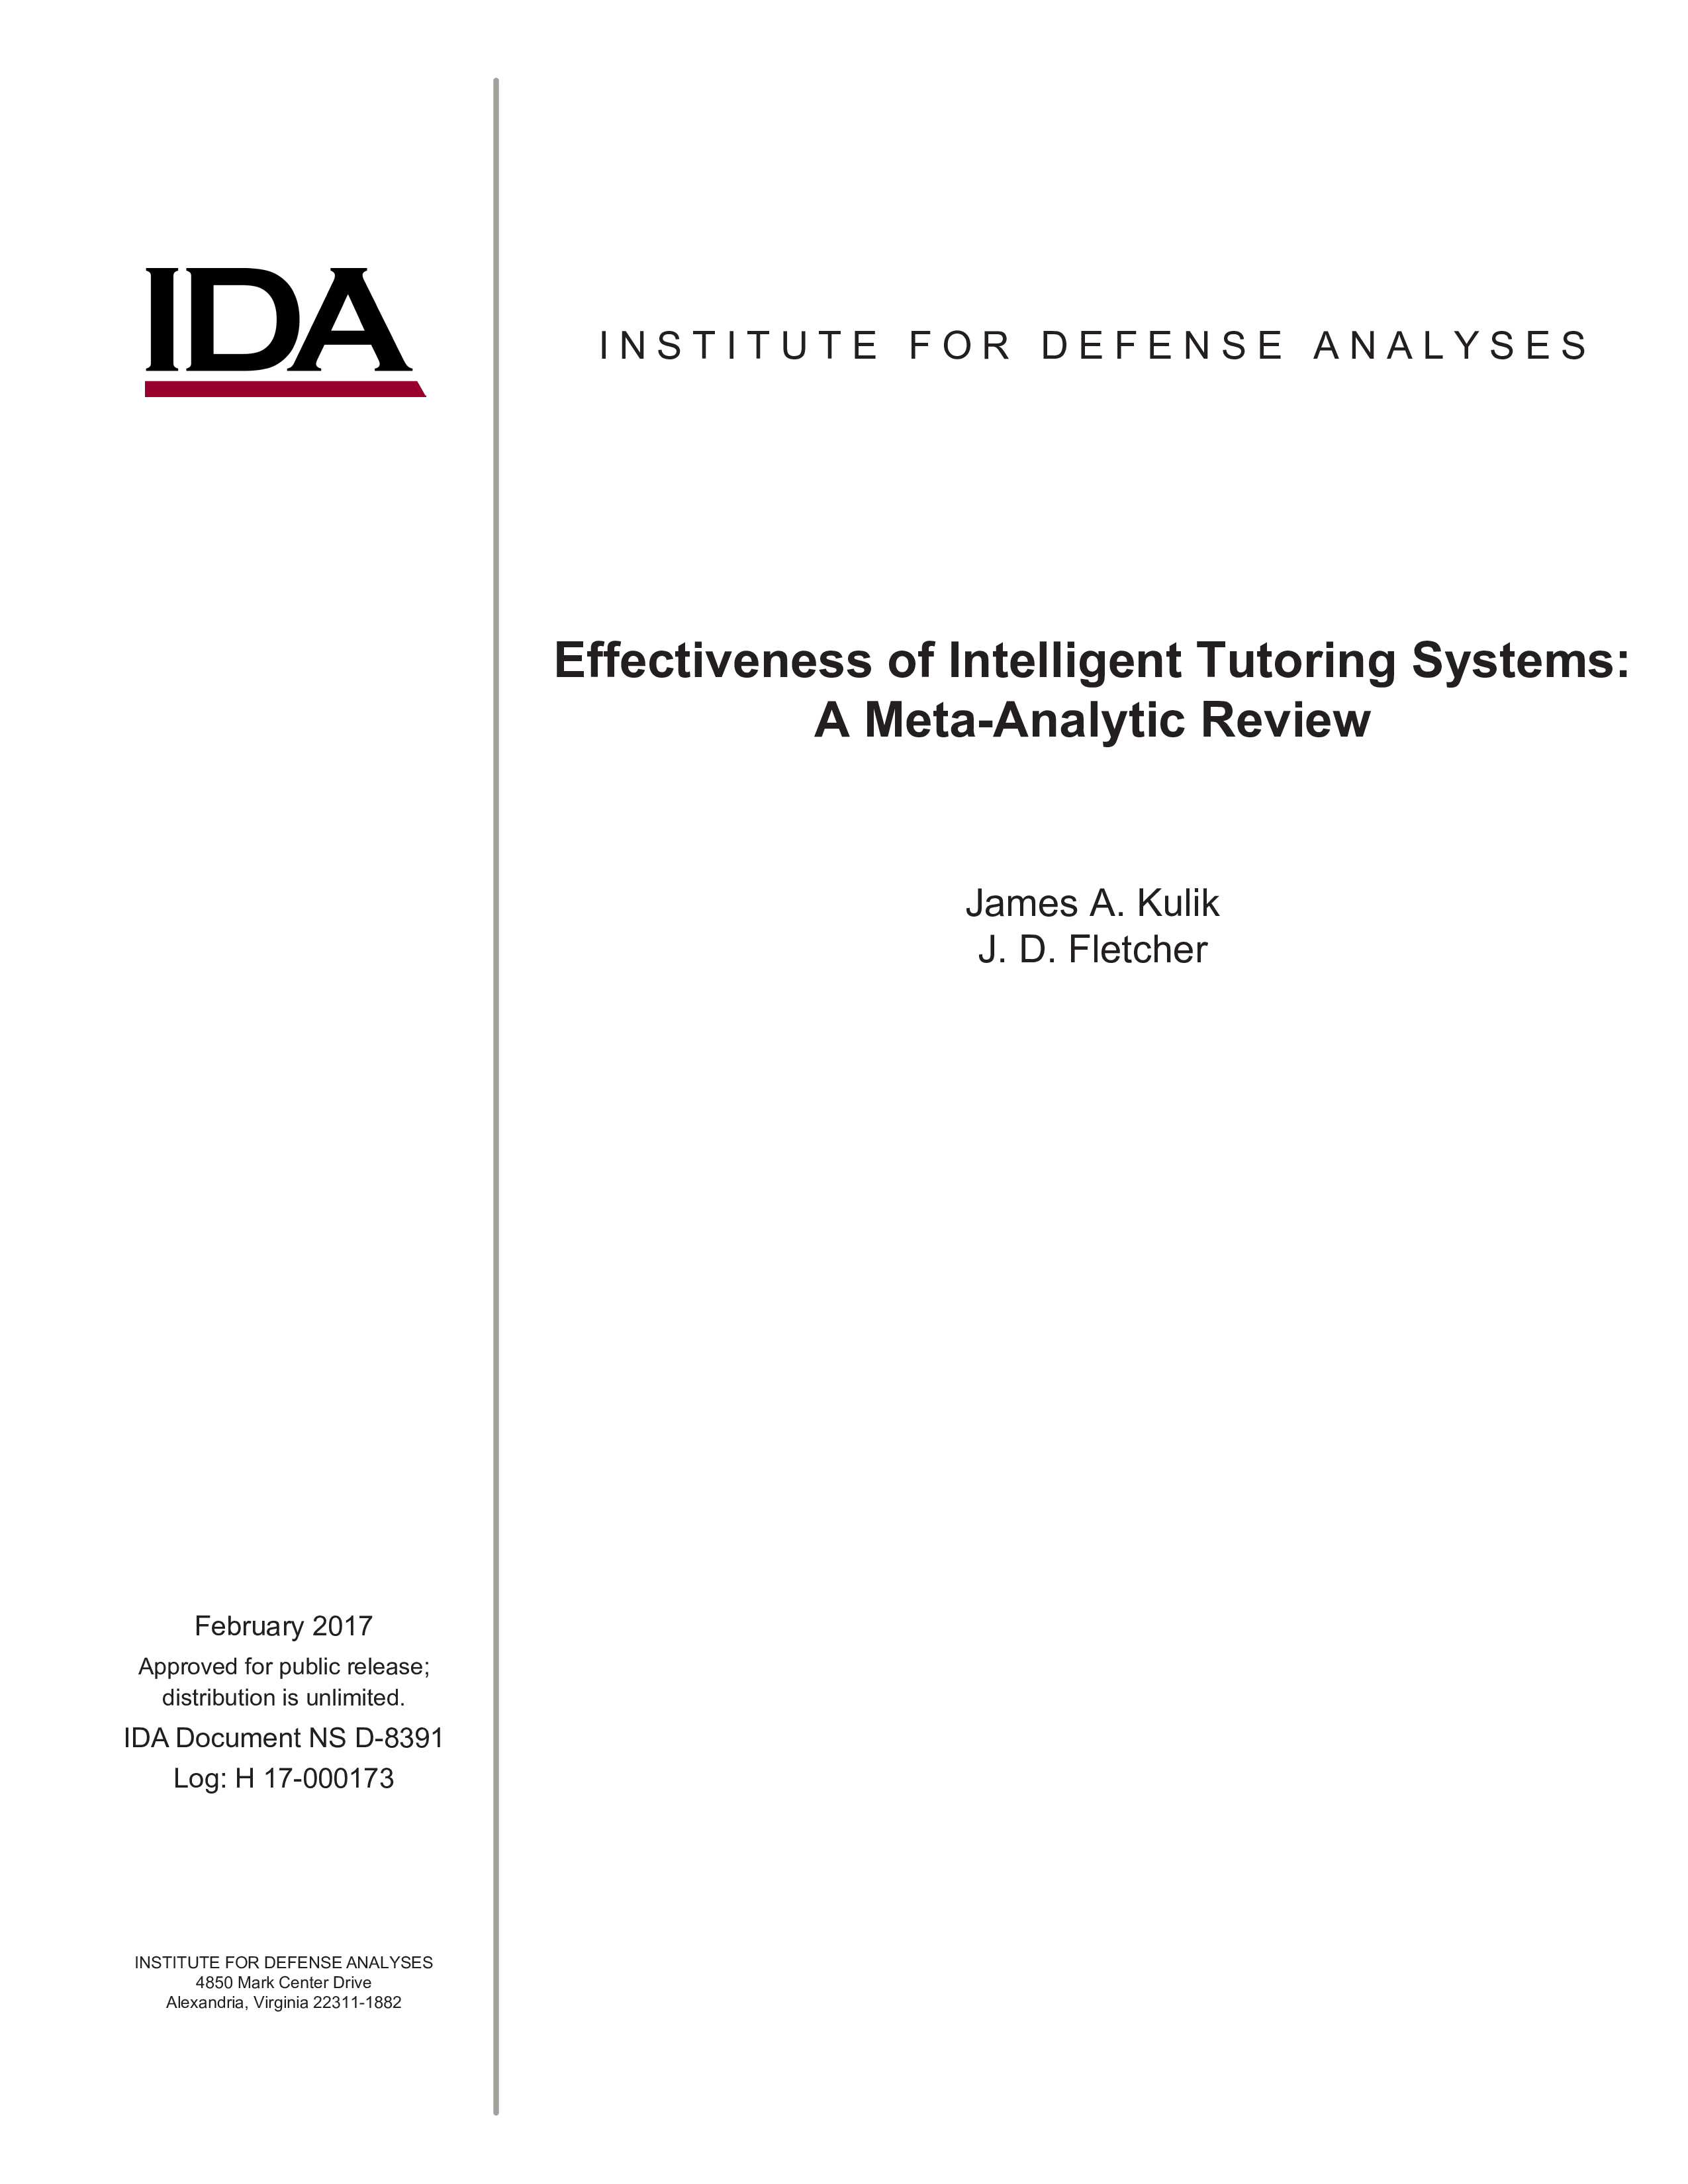 Effectiveness of Intelligent Tutoring Systems: A Meta-Analytic Review